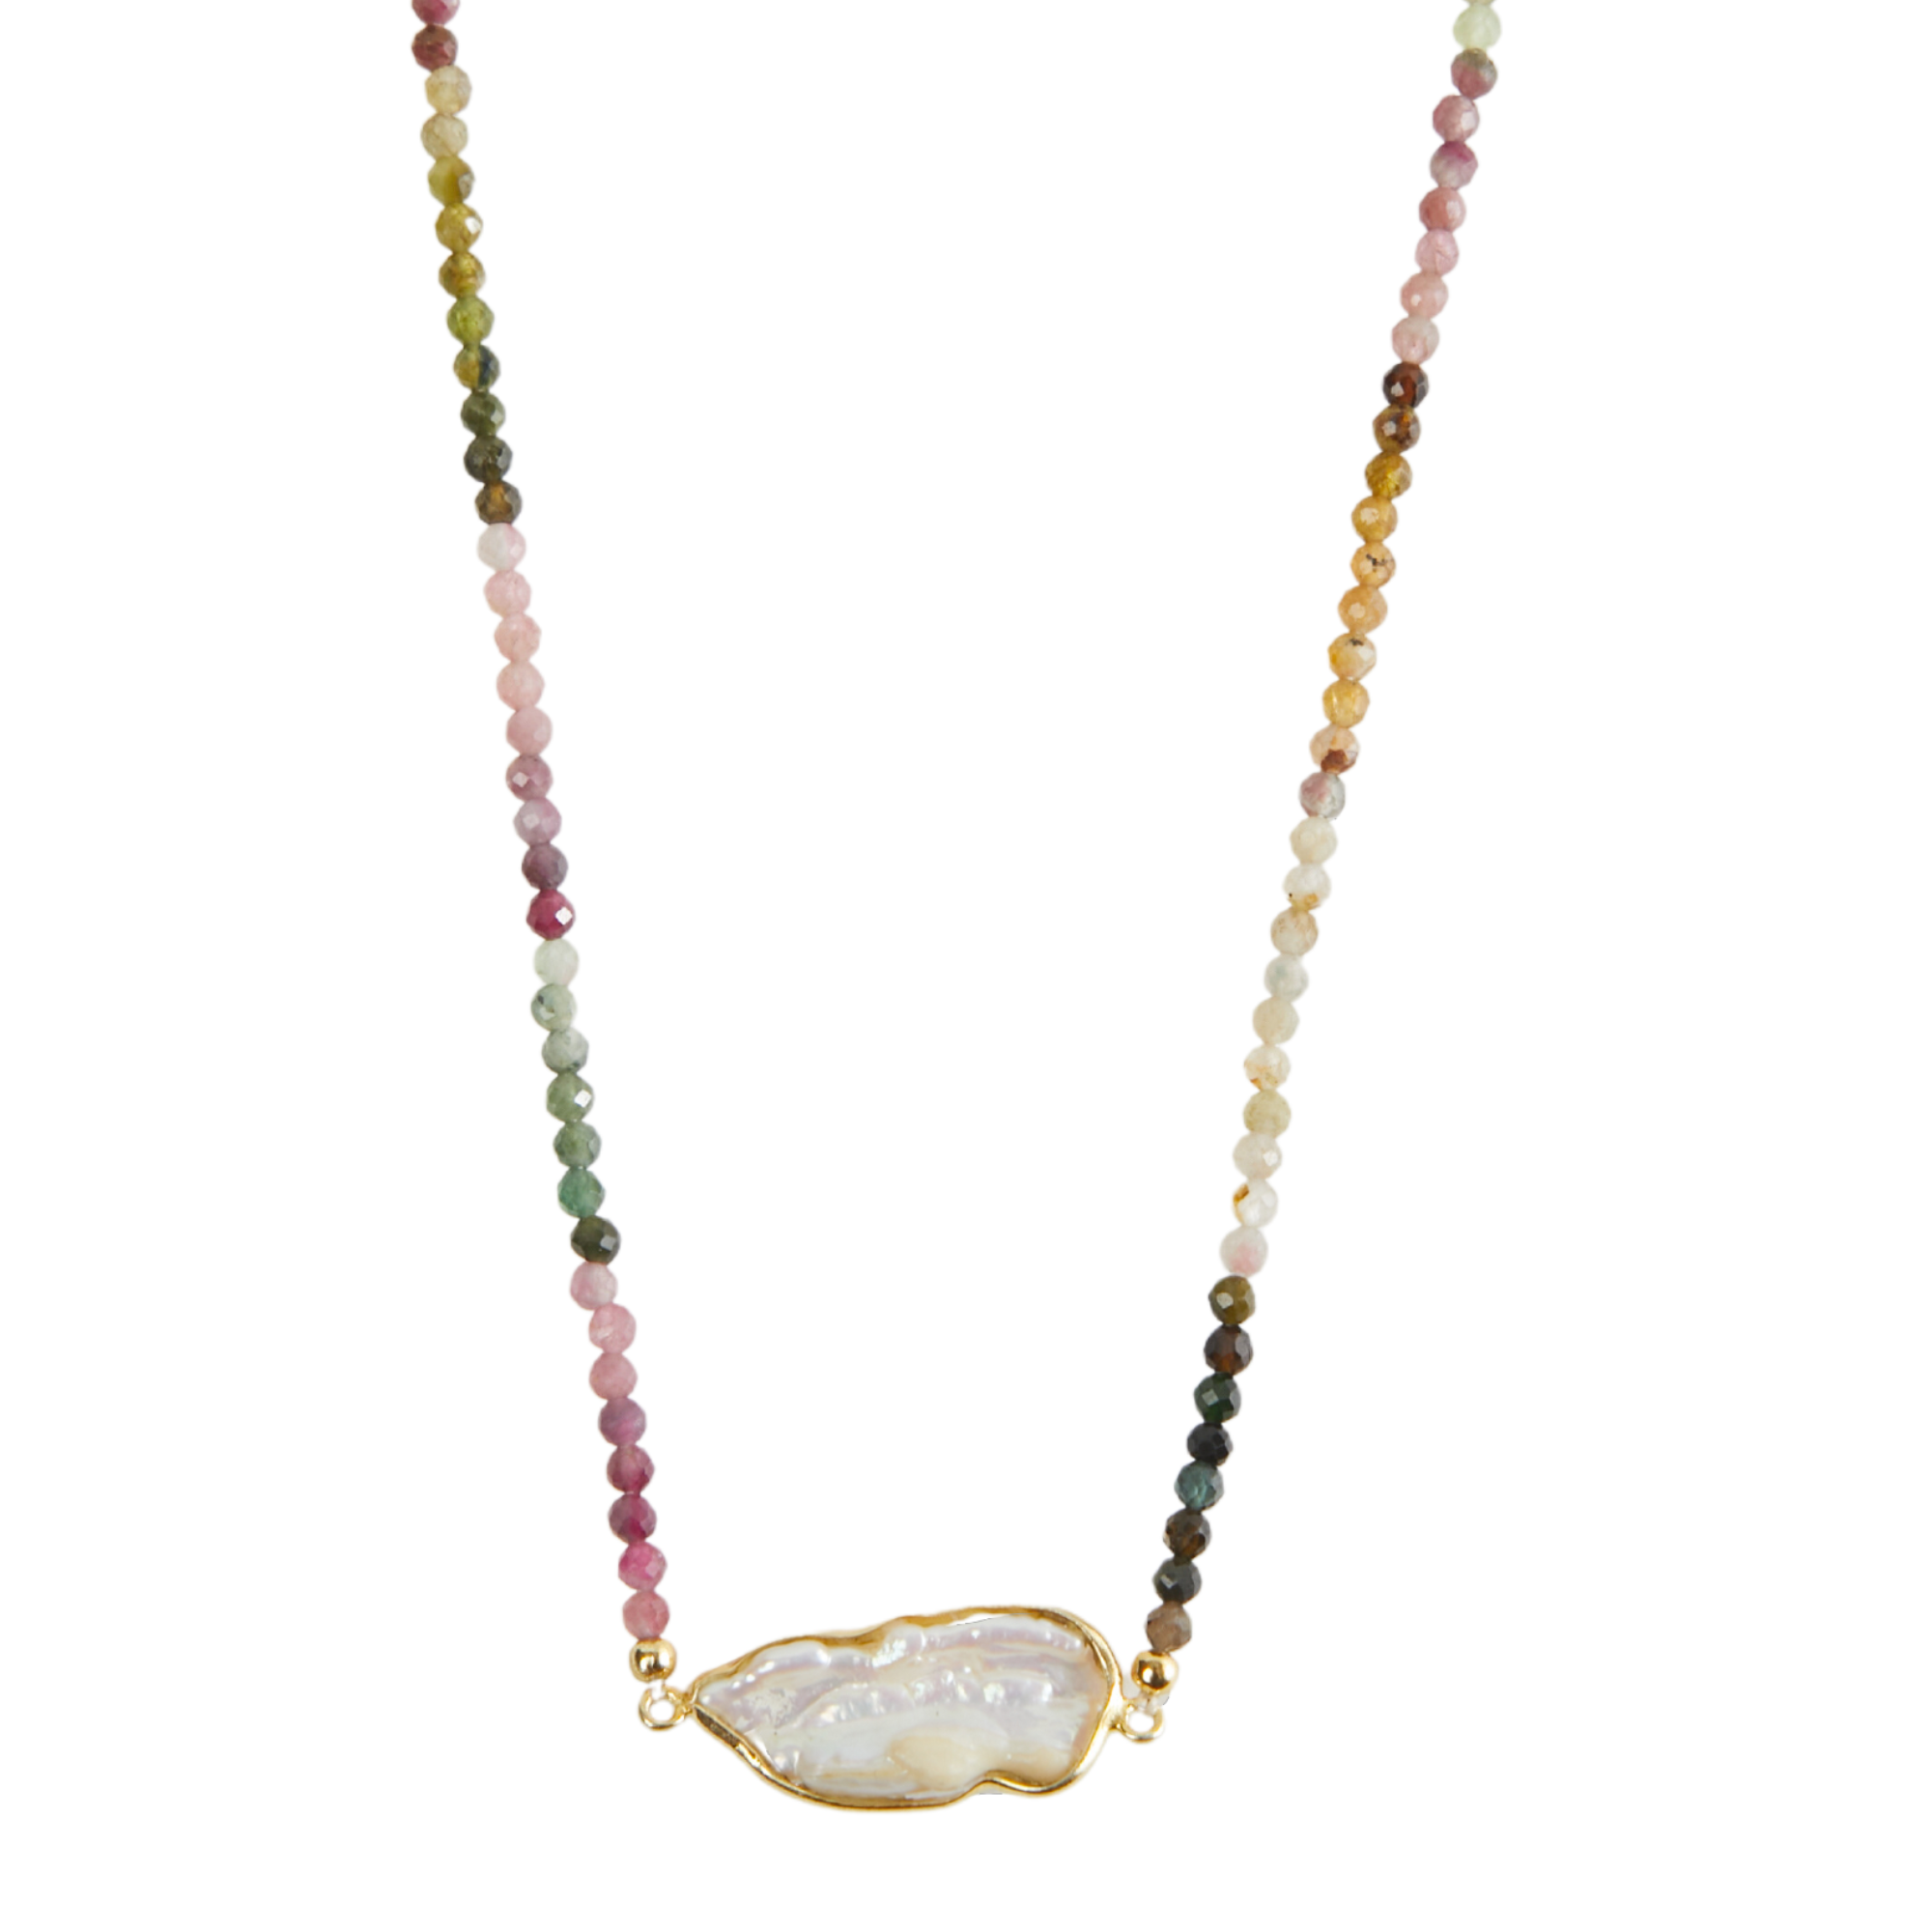 THE PEARL BEZELED NECKLACE